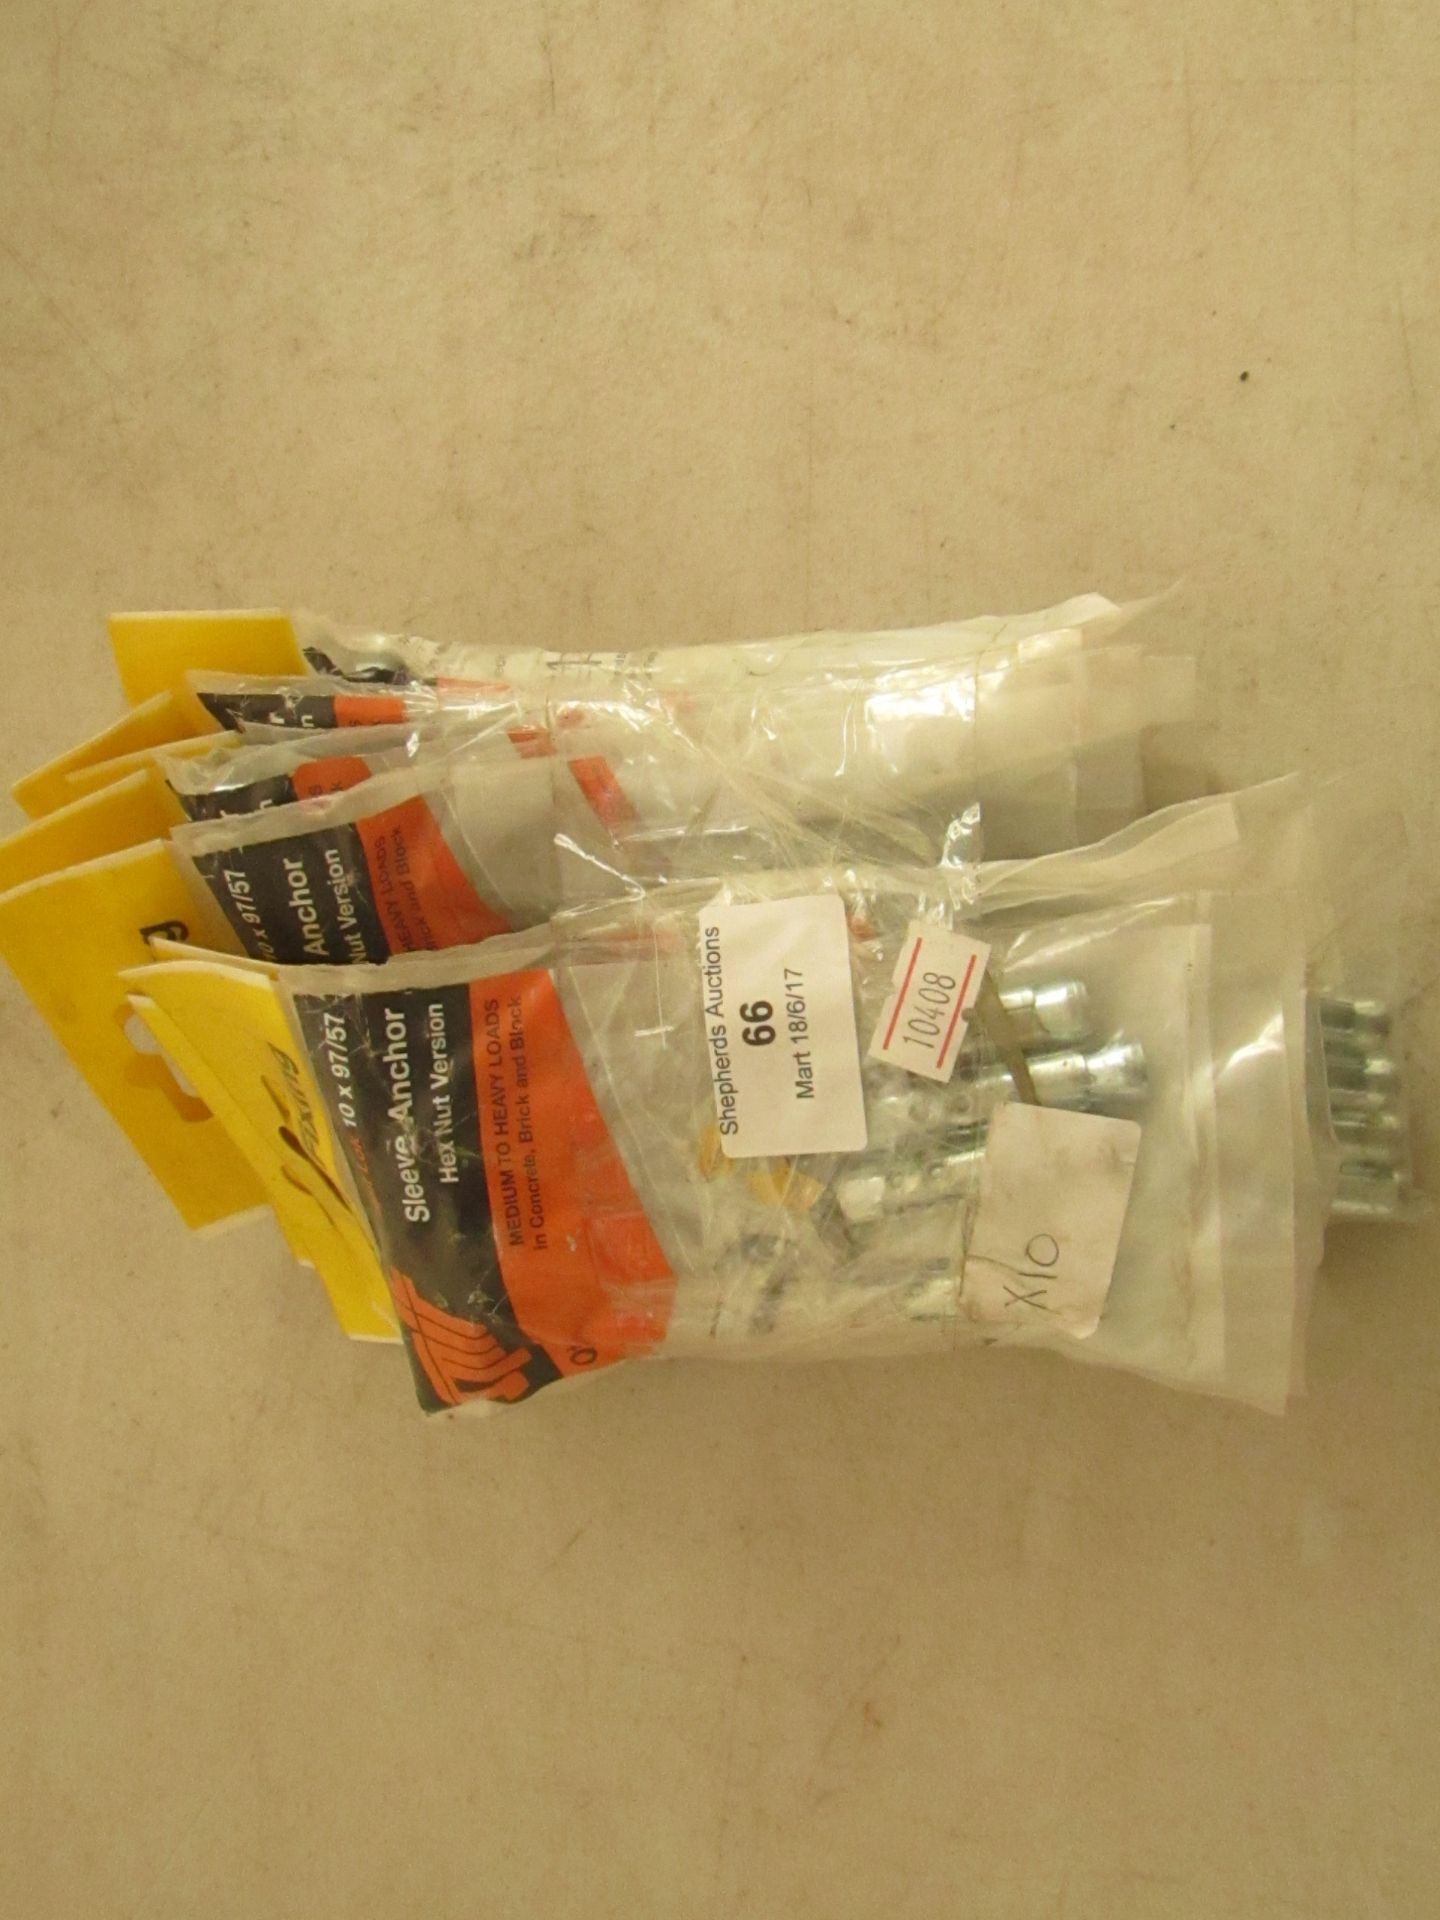 10x Packs of 4 Spit sleeve anchors, all new and packaged.